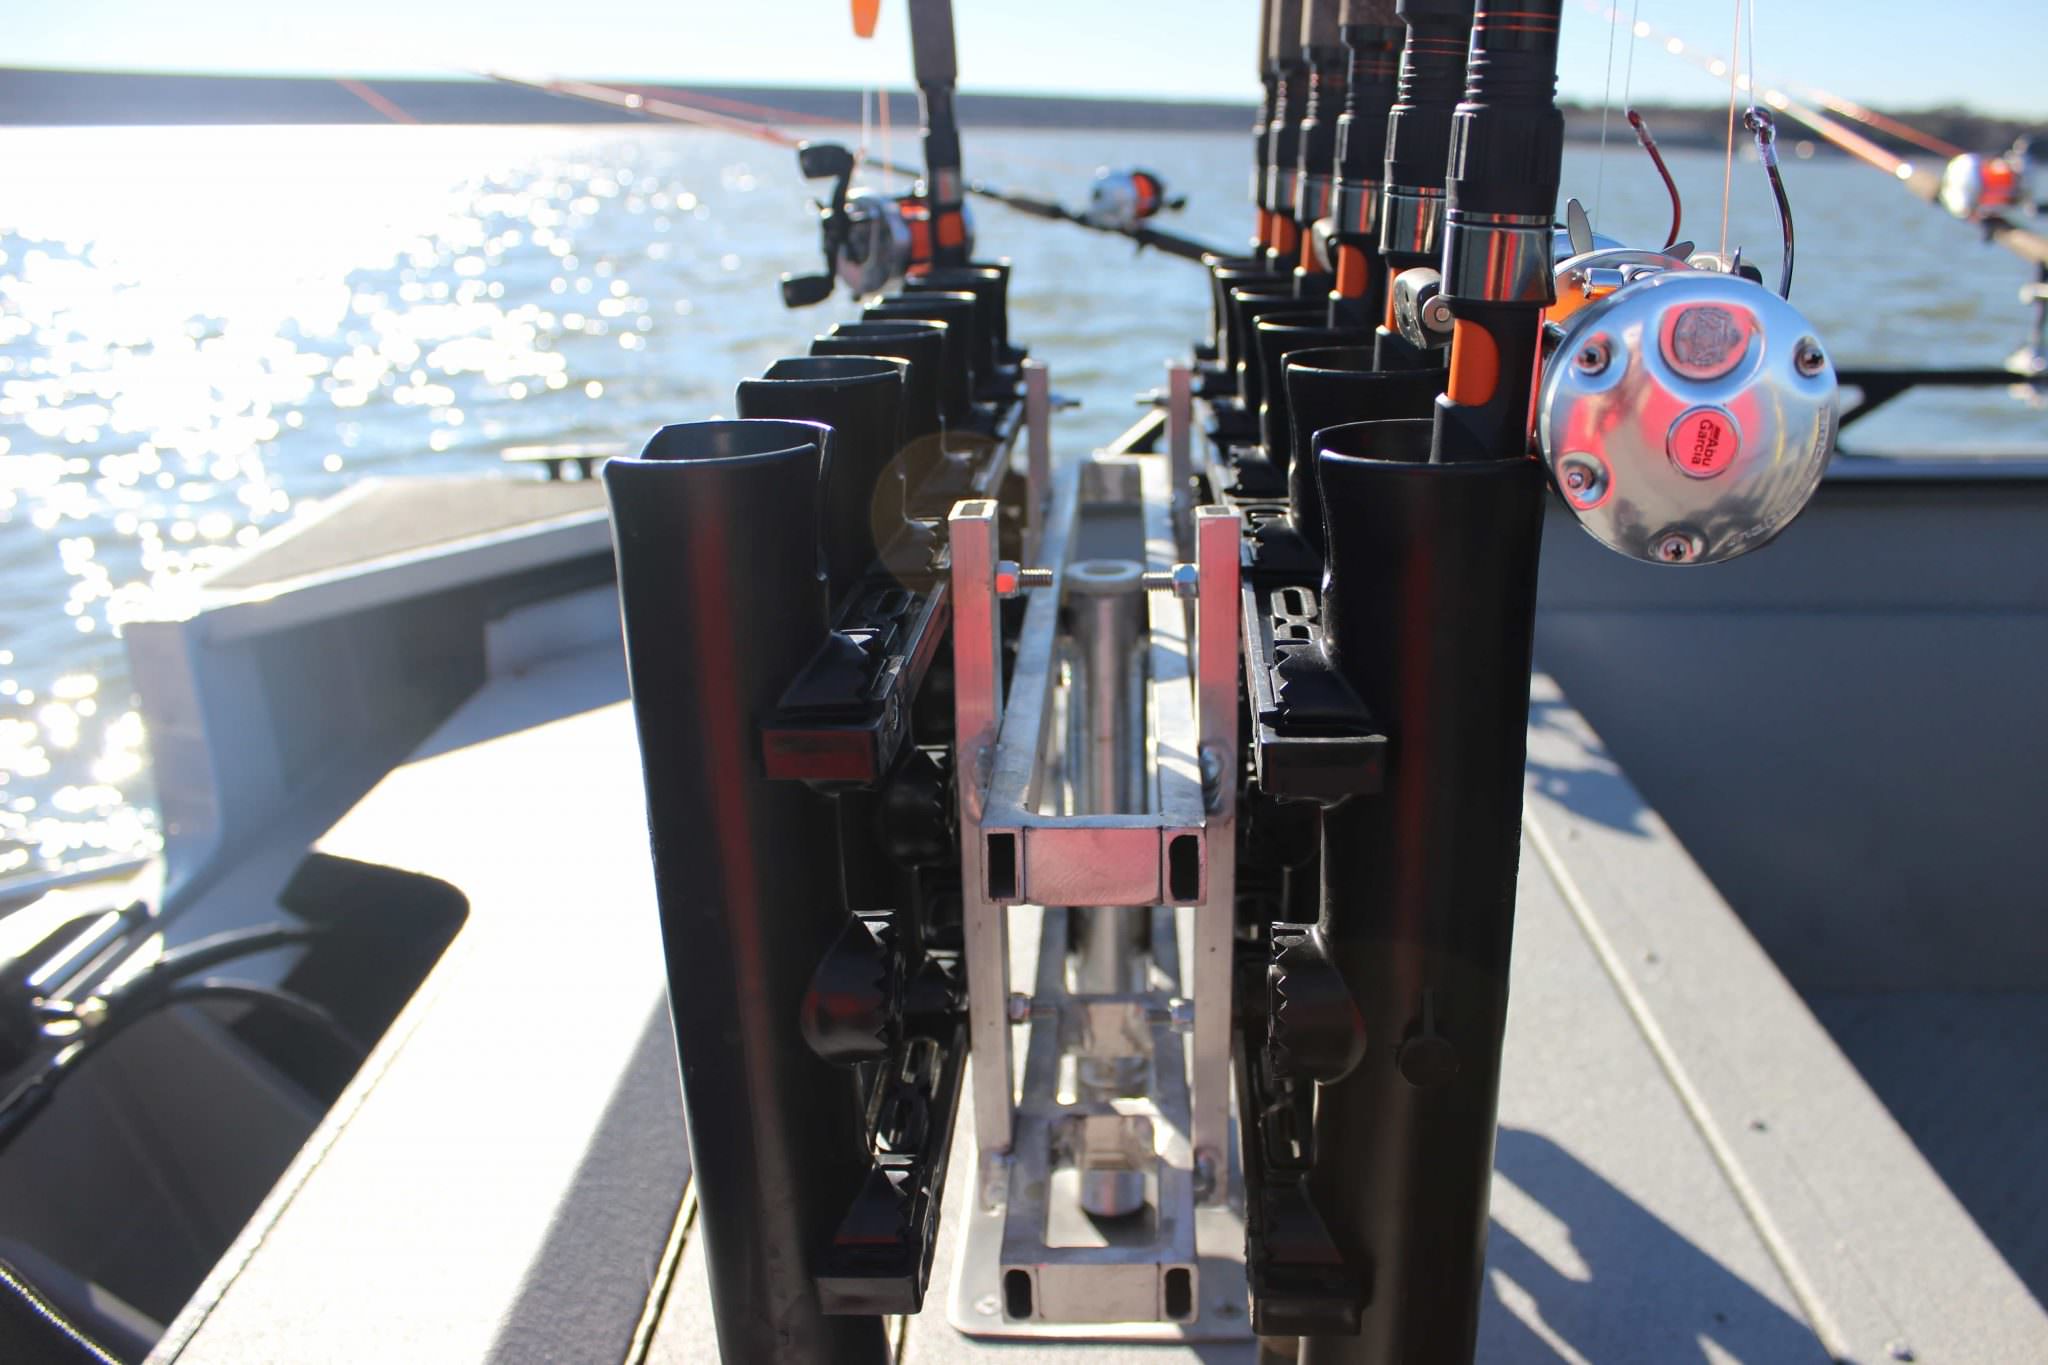 How-To Install Rod Holders on Fishing Boat